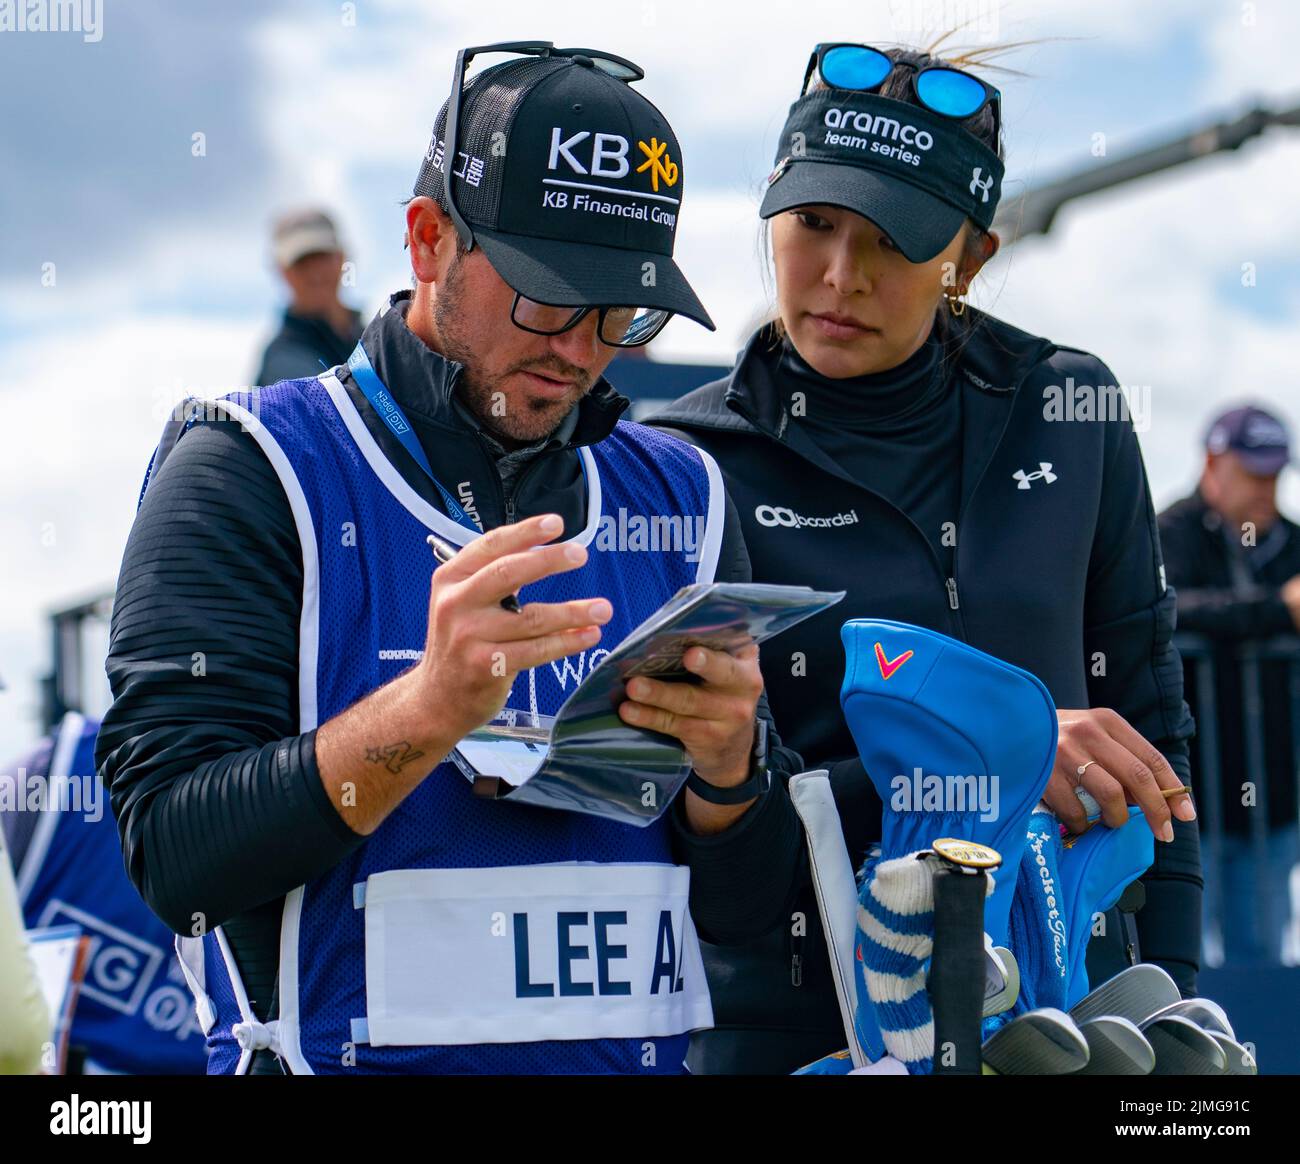 Gullane, Scotland, UK. 6th August 2022. Third round of the AIG Women’s Open golf championship at Muirfield in East Lothian. Pic; Alison Lee talks with caddie at the 13th hole.  Iain Masterton/Alamy Live News Stock Photo